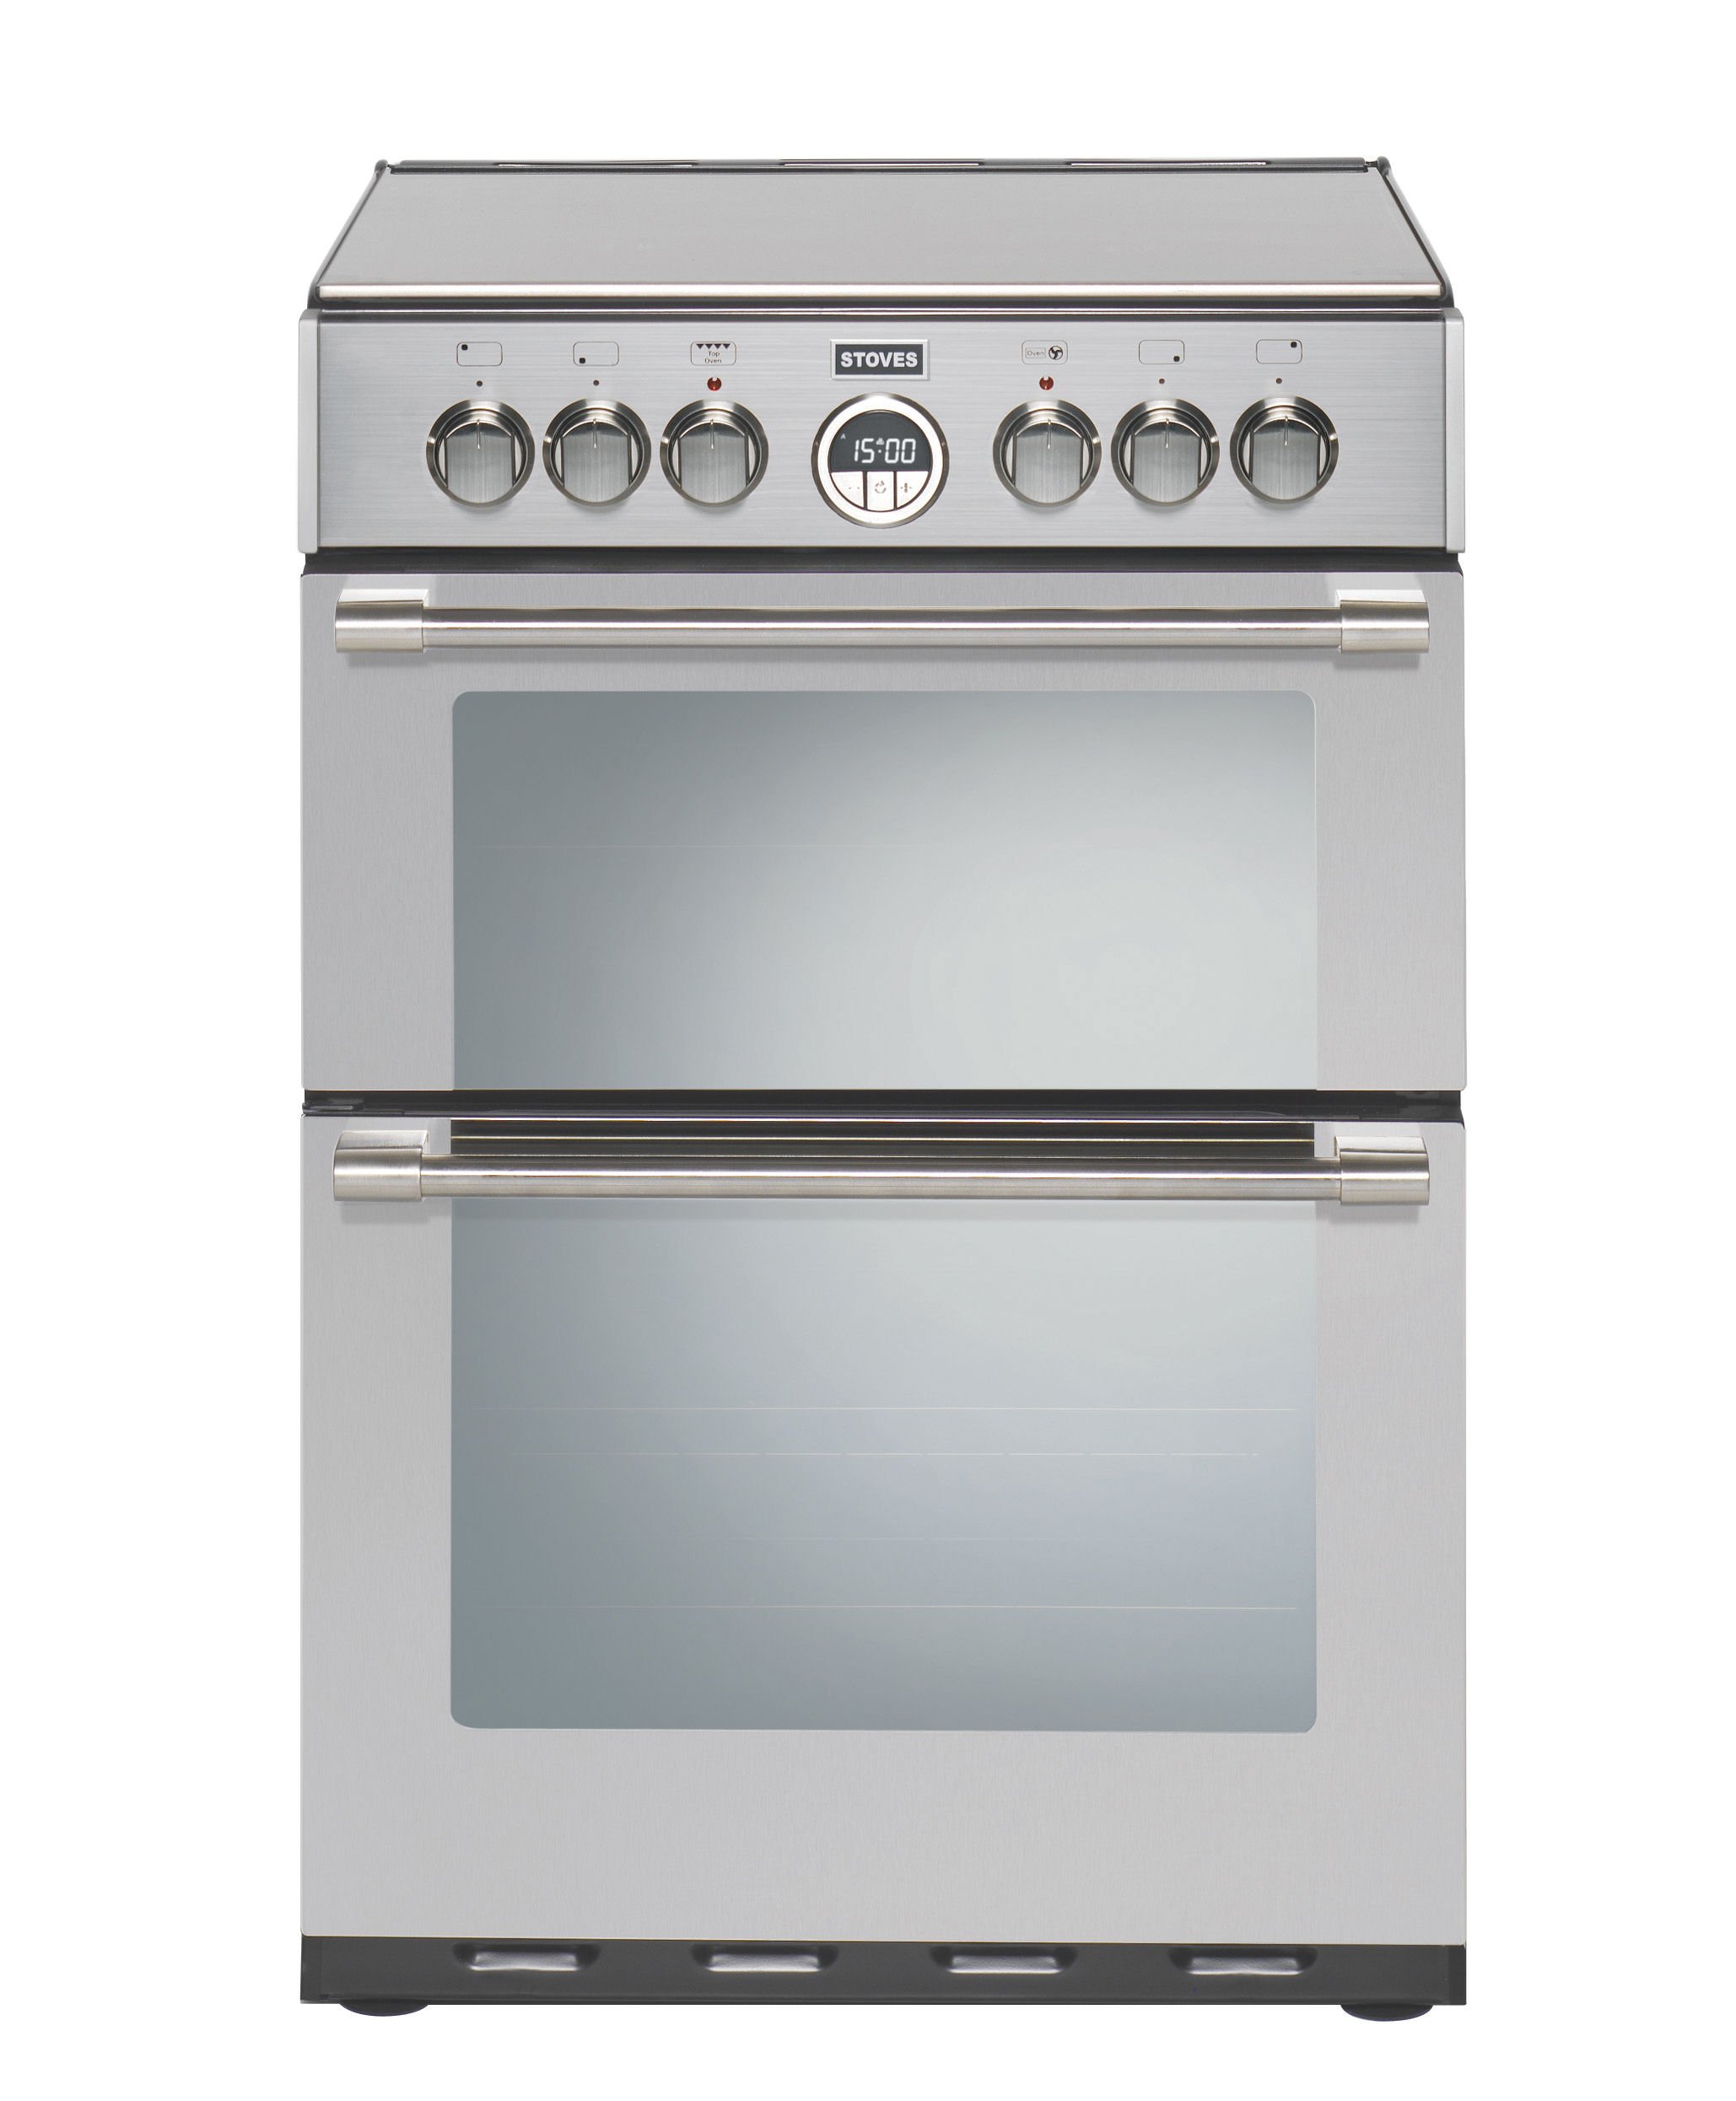 60cm Electric Range Cooker With A 4 Zone Electric Ceramic Hob, Conventional Oven & Grill and Fanned Main Oven